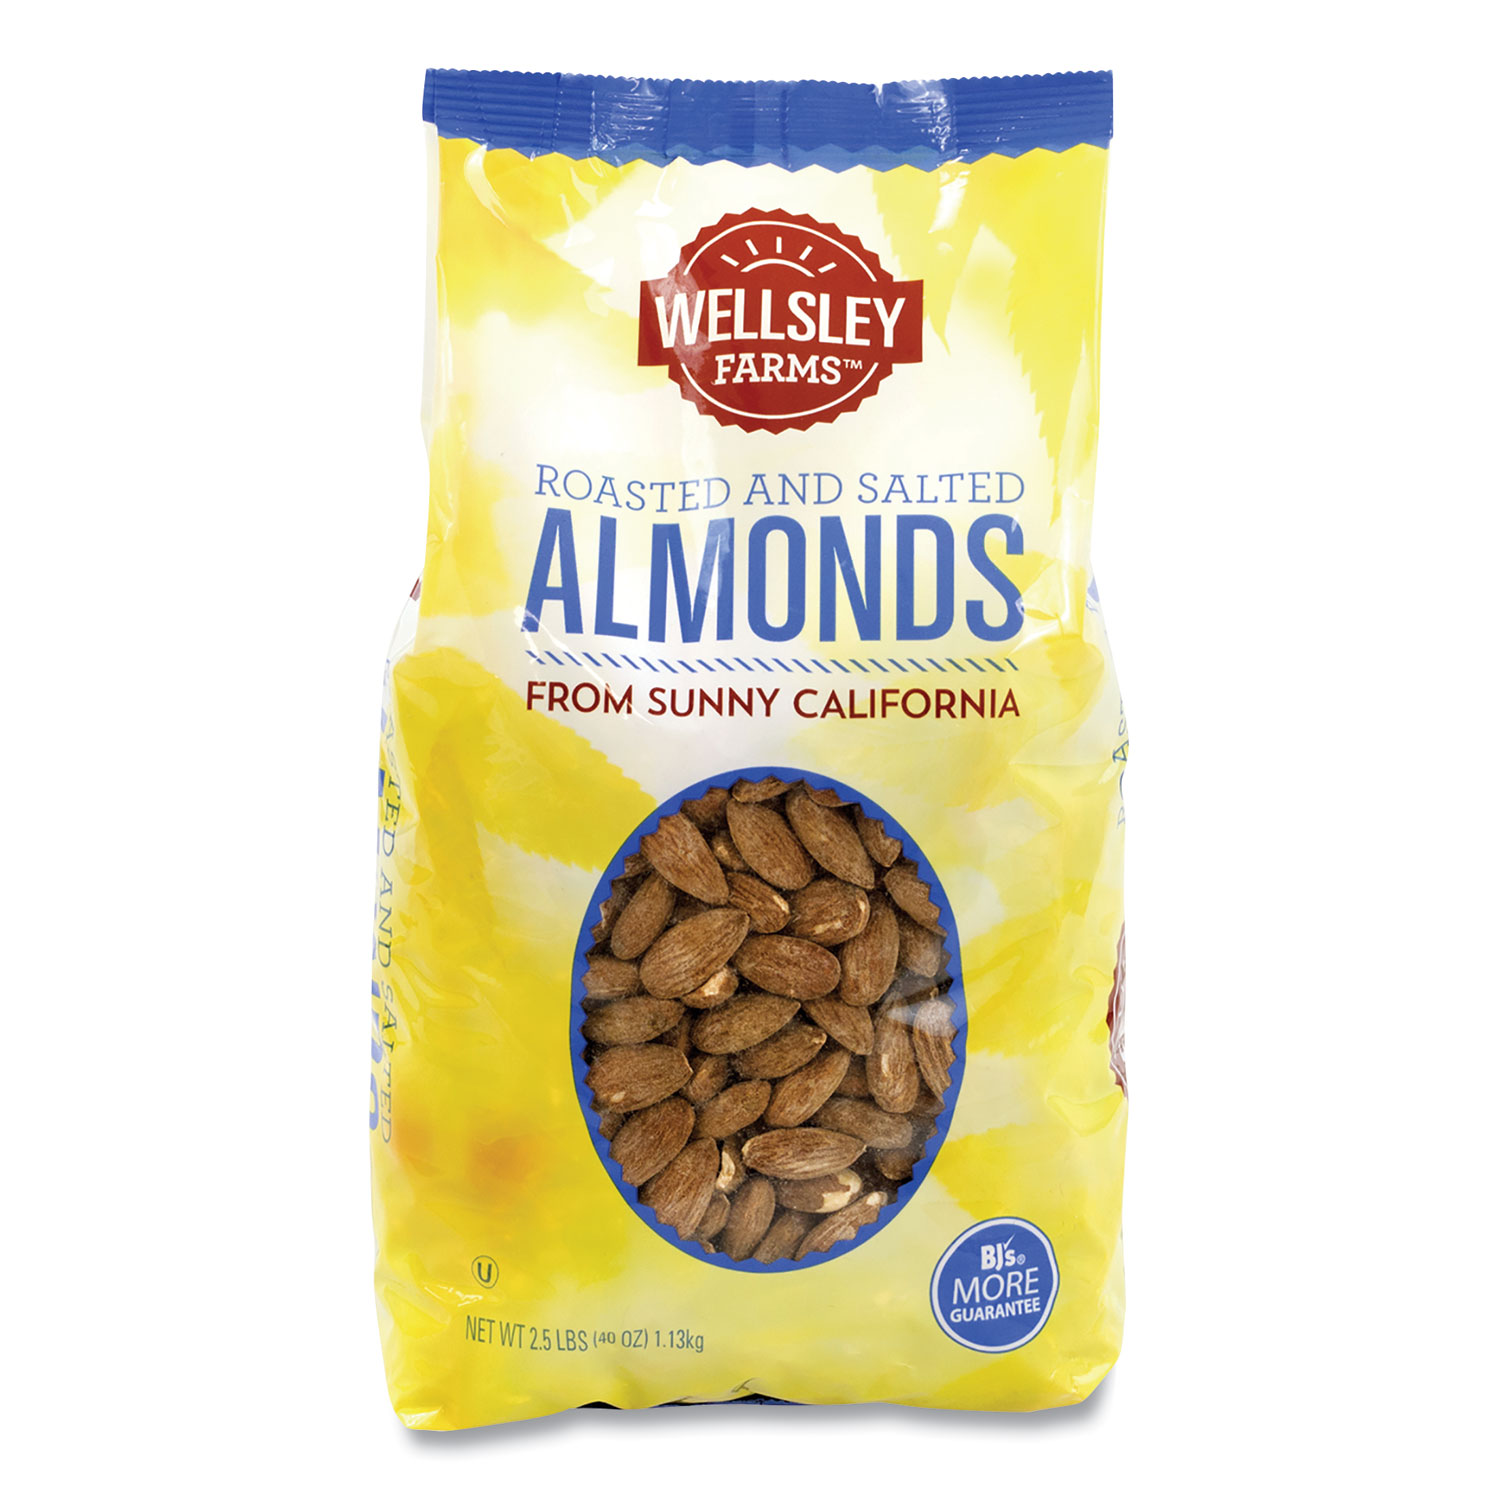  Wellsley Farms 751 Roasted and Salted Almonds, 2.5 lb Bag, 1 Bag/Carton, Free Delivery in 1-4 Business Days (GRR22000615) 